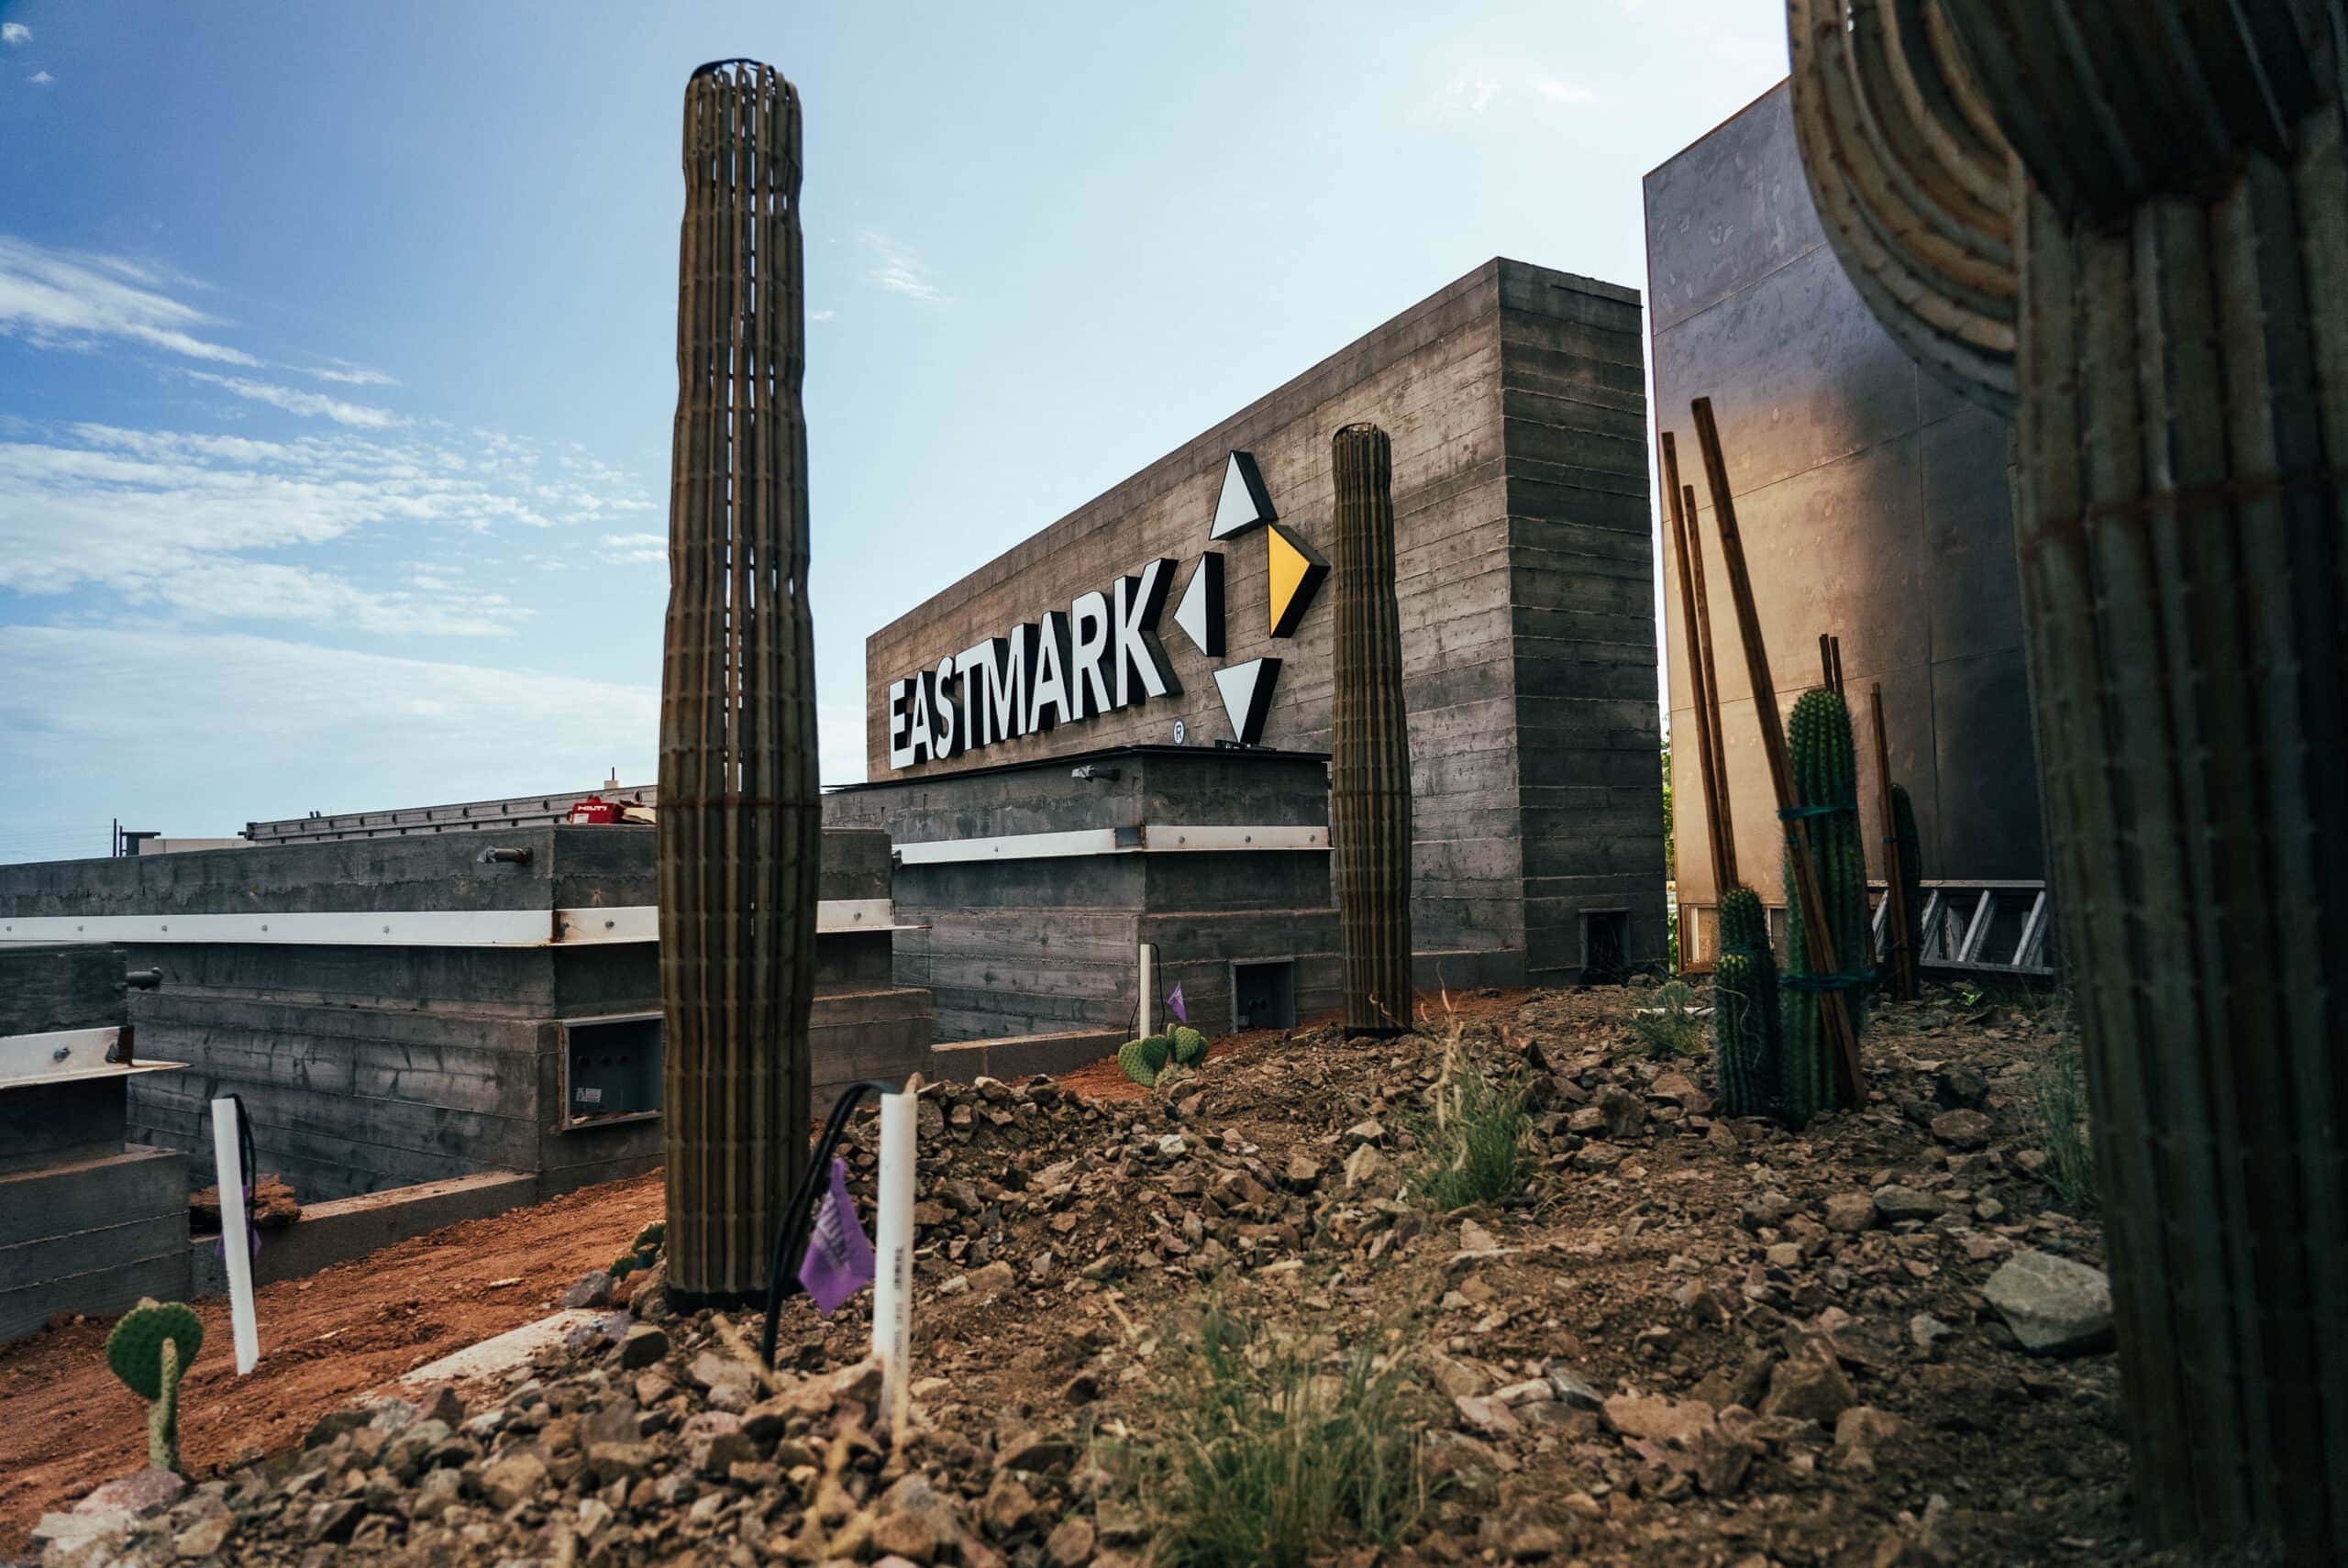 A building with a sign featuring an Ironwood roofing contractor, adorned by a cactus.